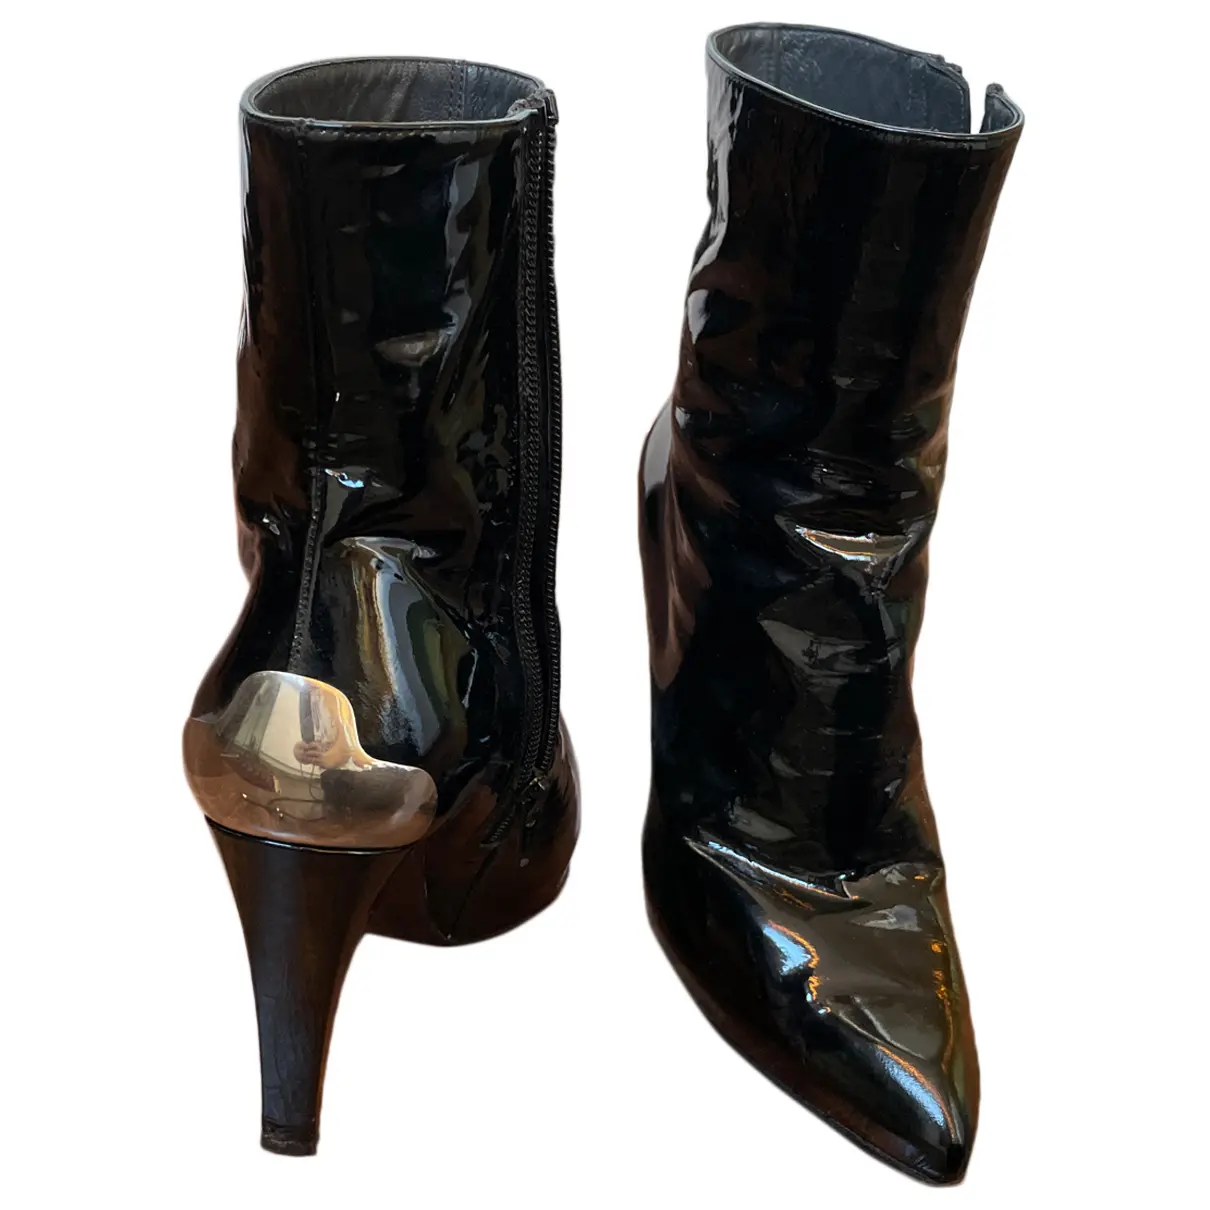 Patent leather ankle boots Stuart Weitzman